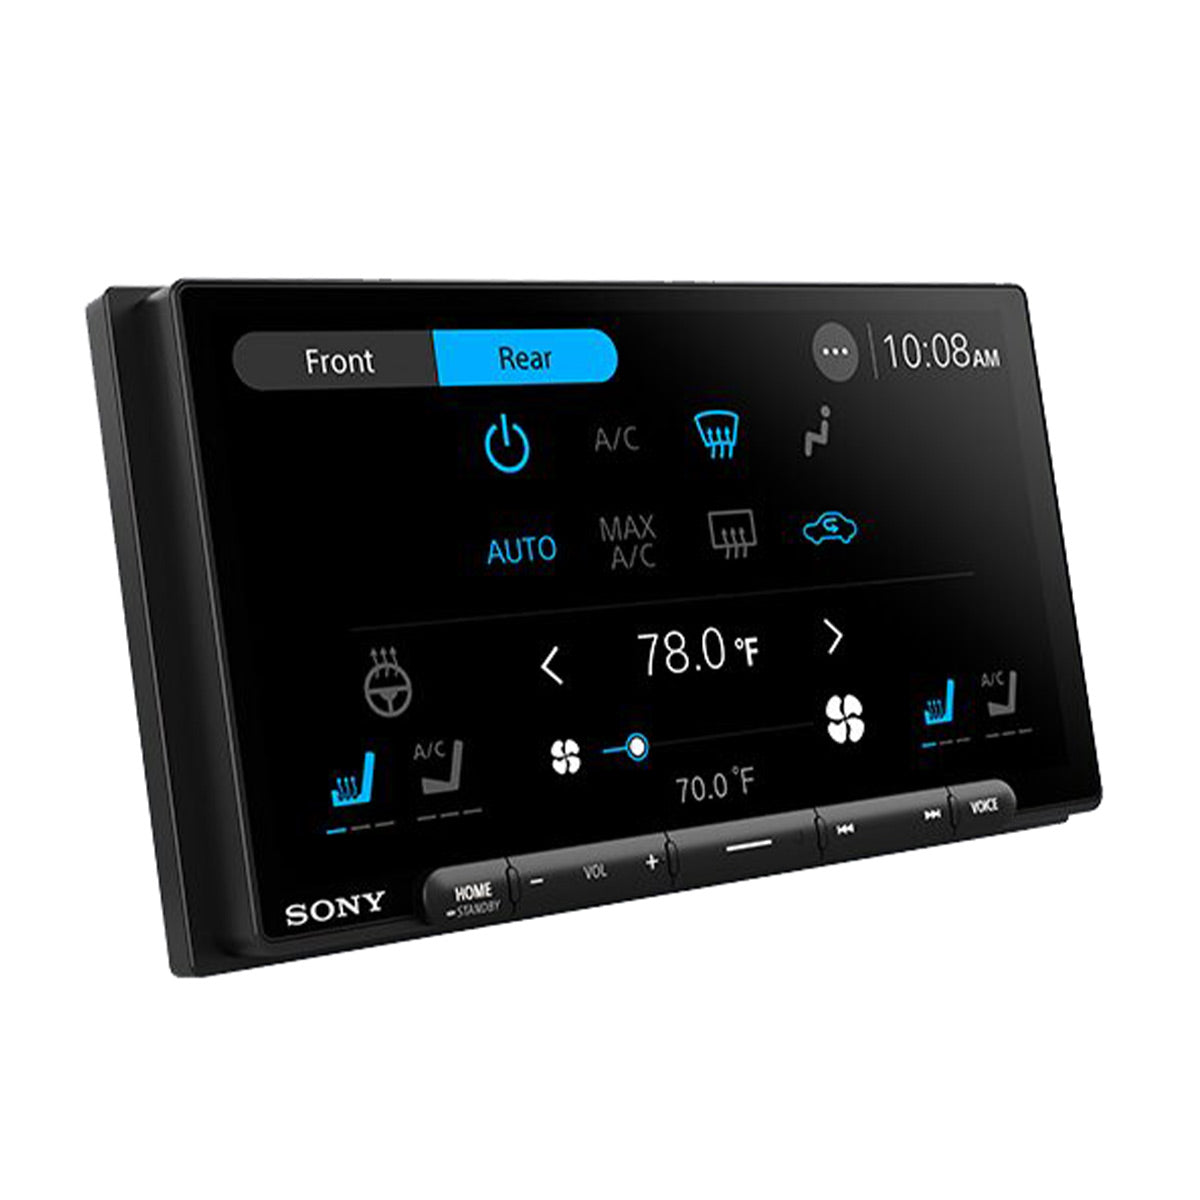 Sony Mobile XAV-AX6000 Digital Multimedia Receiver with Android Auto, Apple CarPlay, and HDMI Connectivity